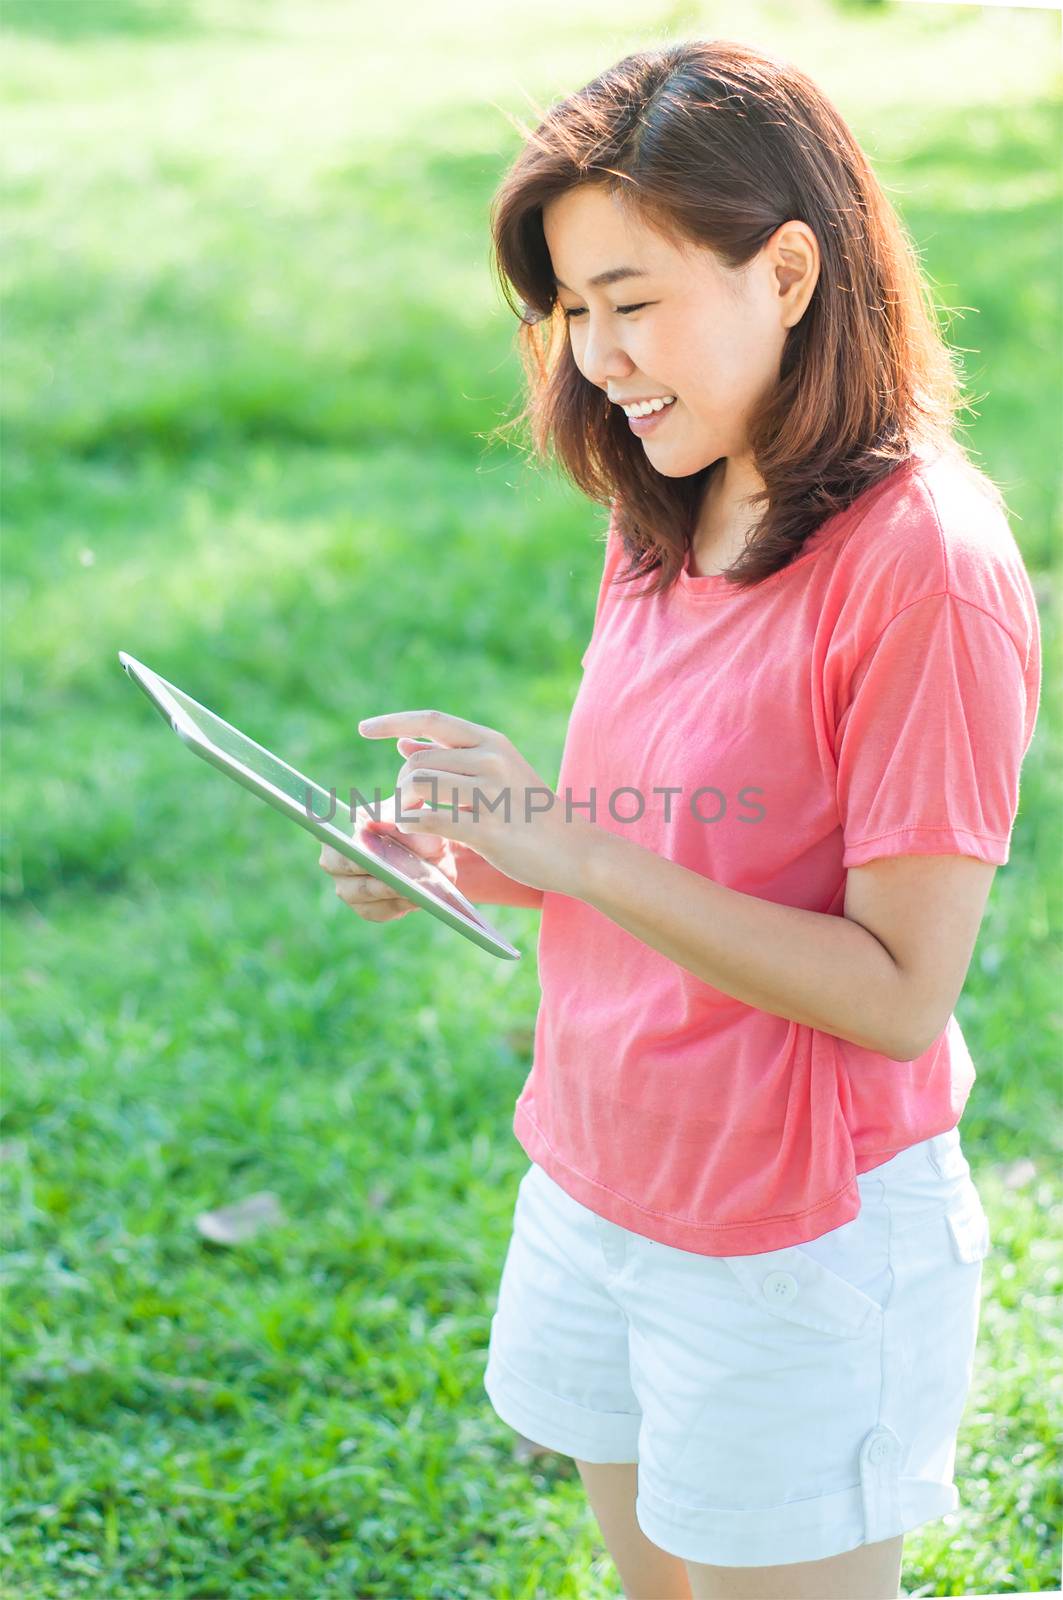 Woman Holding Digital Tablet by TanawatPontchour